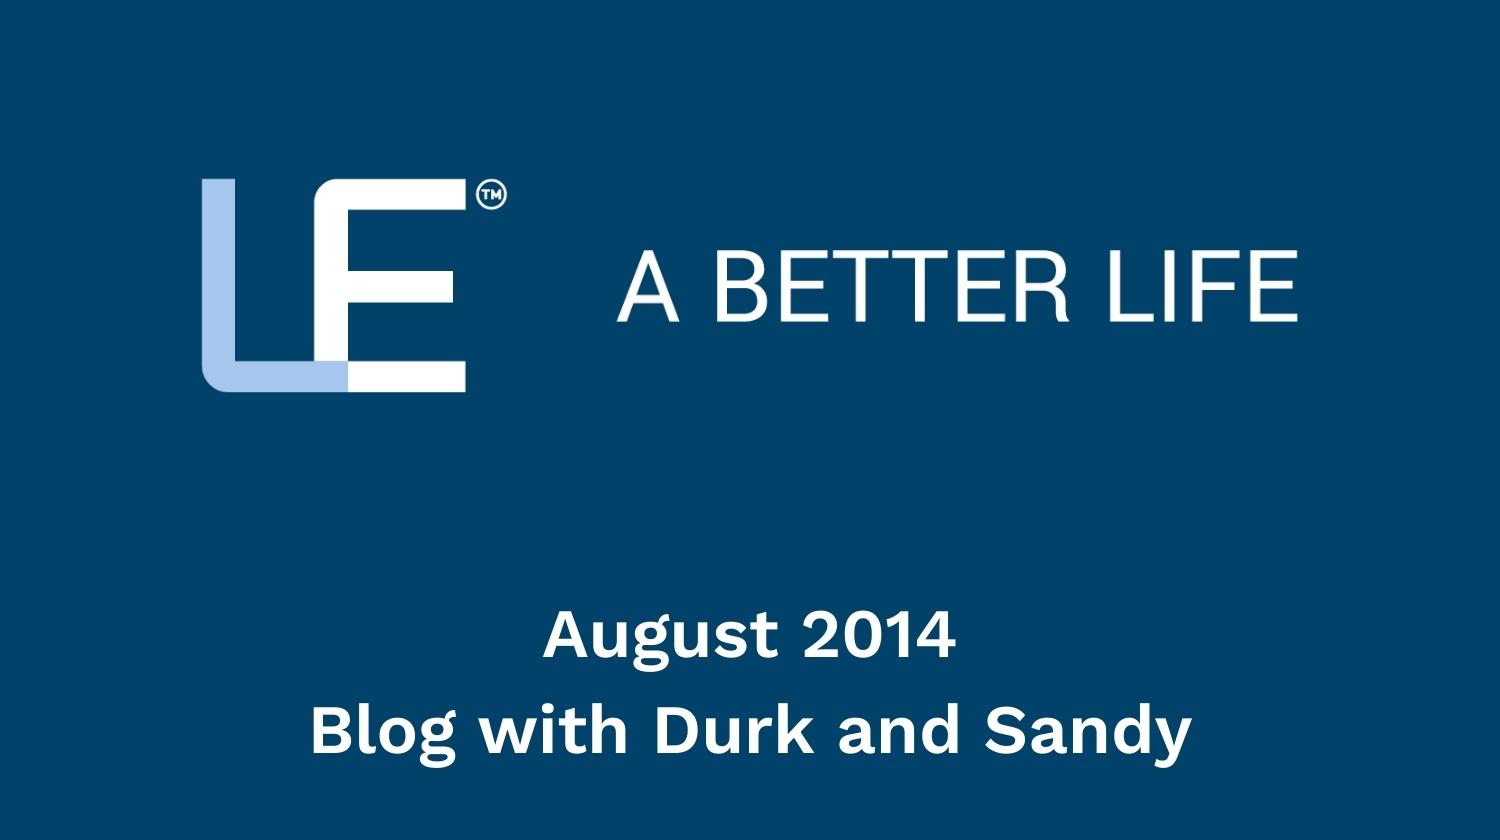 August 2014 Blog with Durk and Sandy